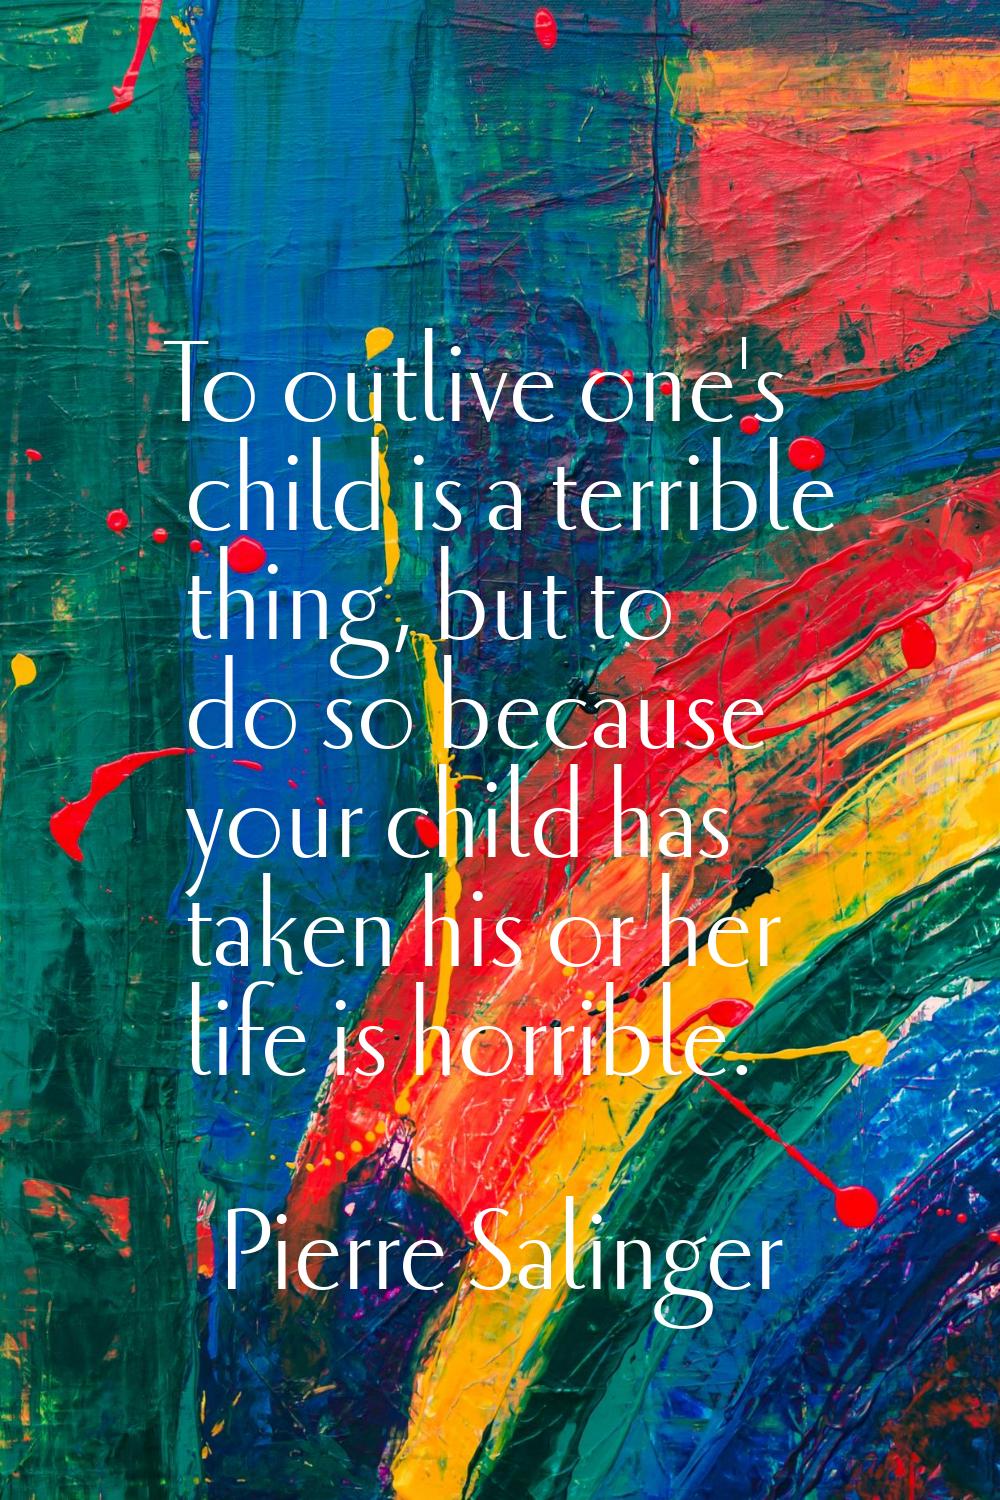 To outlive one's child is a terrible thing, but to do so because your child has taken his or her li